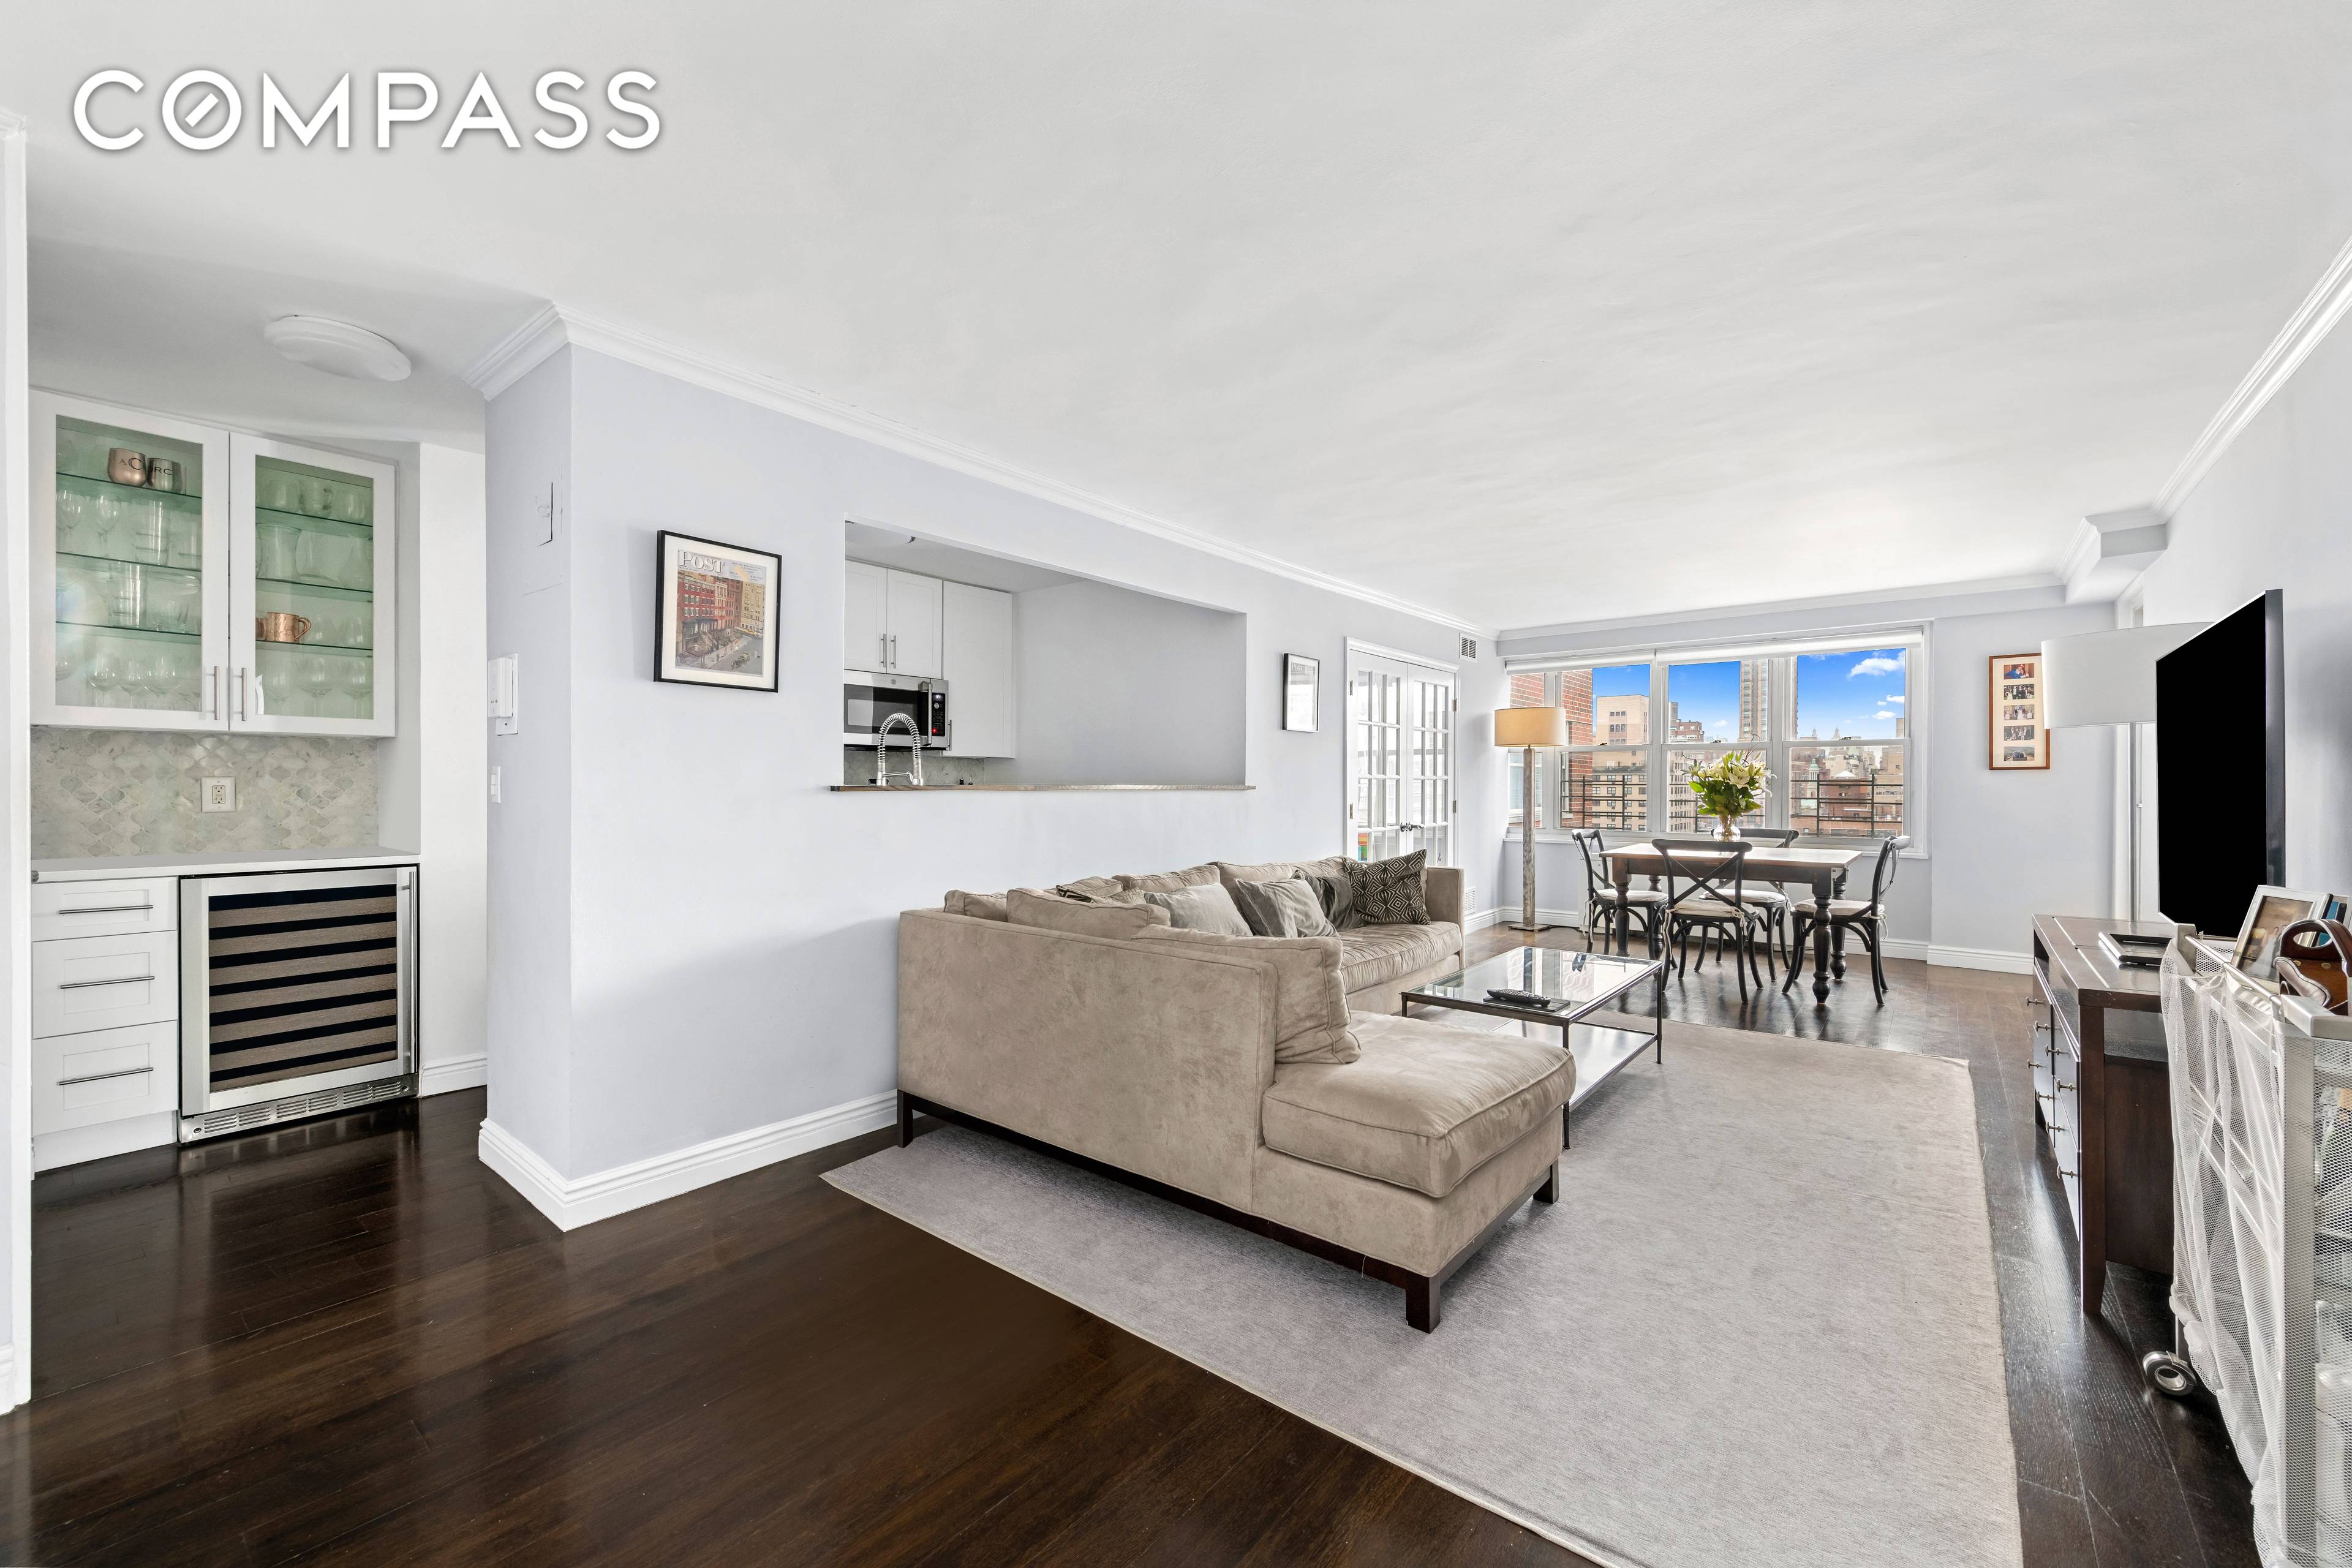 XXX Mint High Floor, Corner Junior 4 already converted two bedroom apartment with private balcony and wide open Western views in the heart of the Upper East Side.